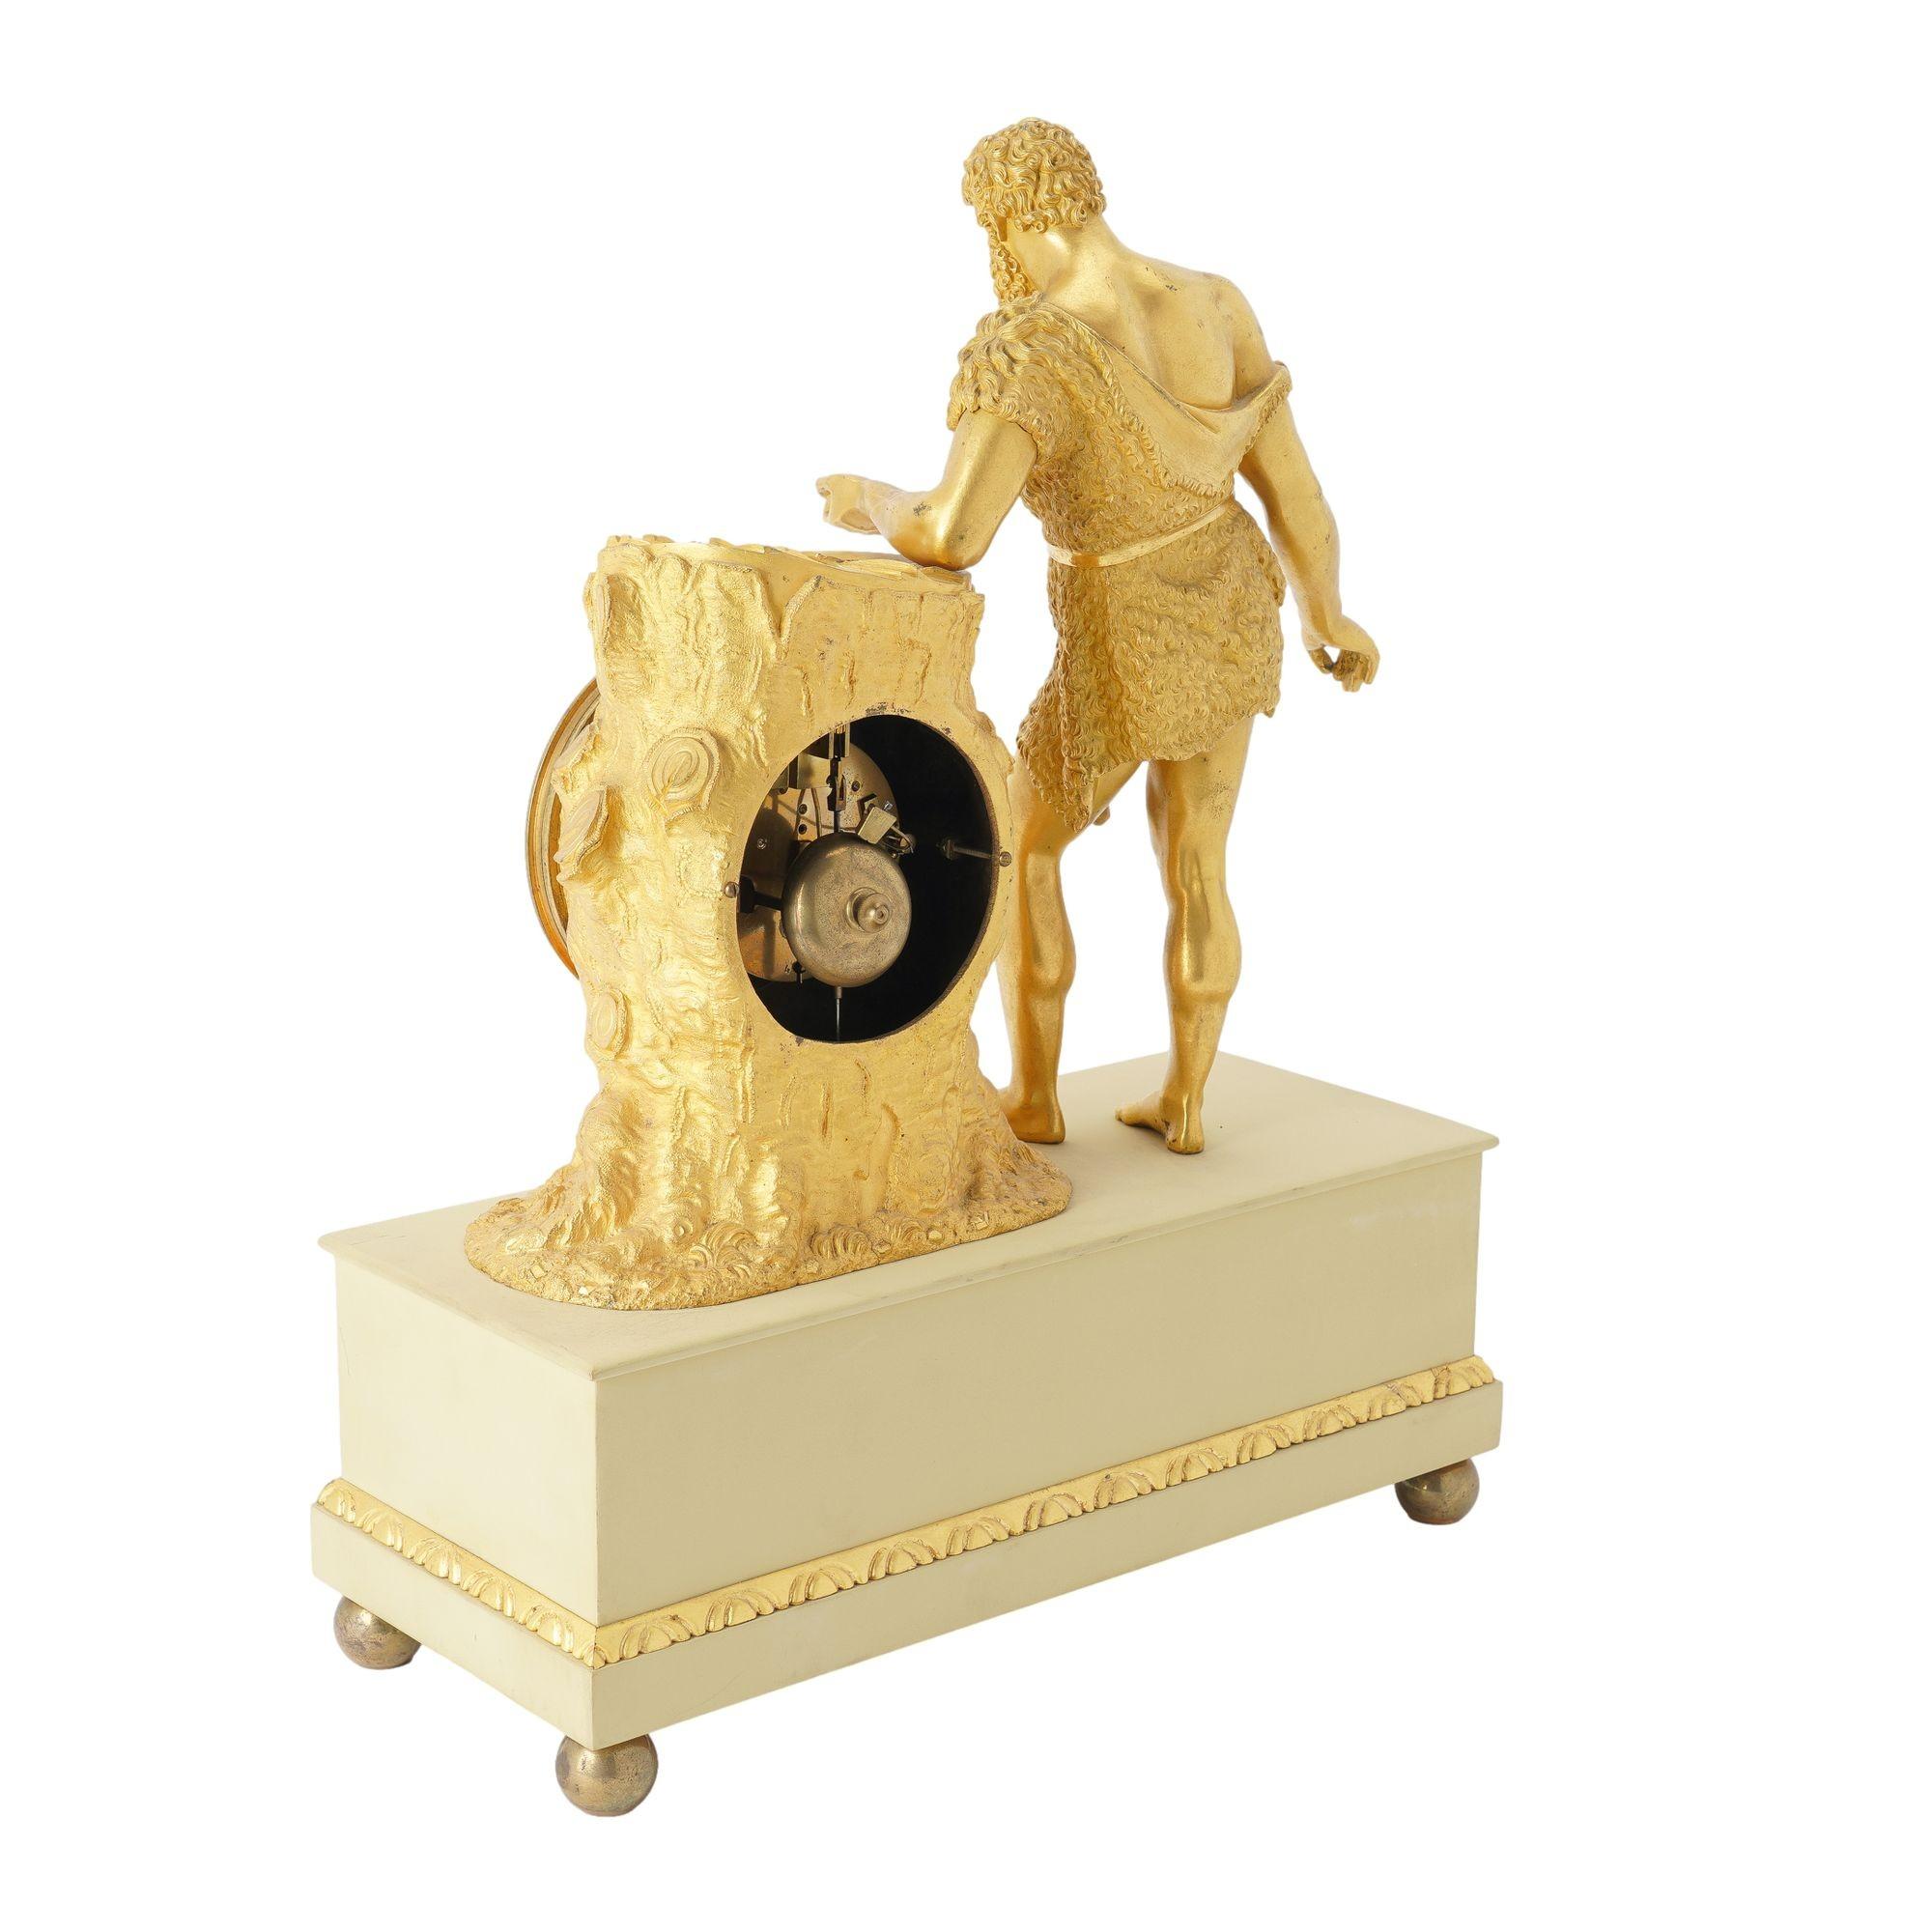 French Charles X period fire gilt bronze mantel clock, c. 1820-30 For Sale 2